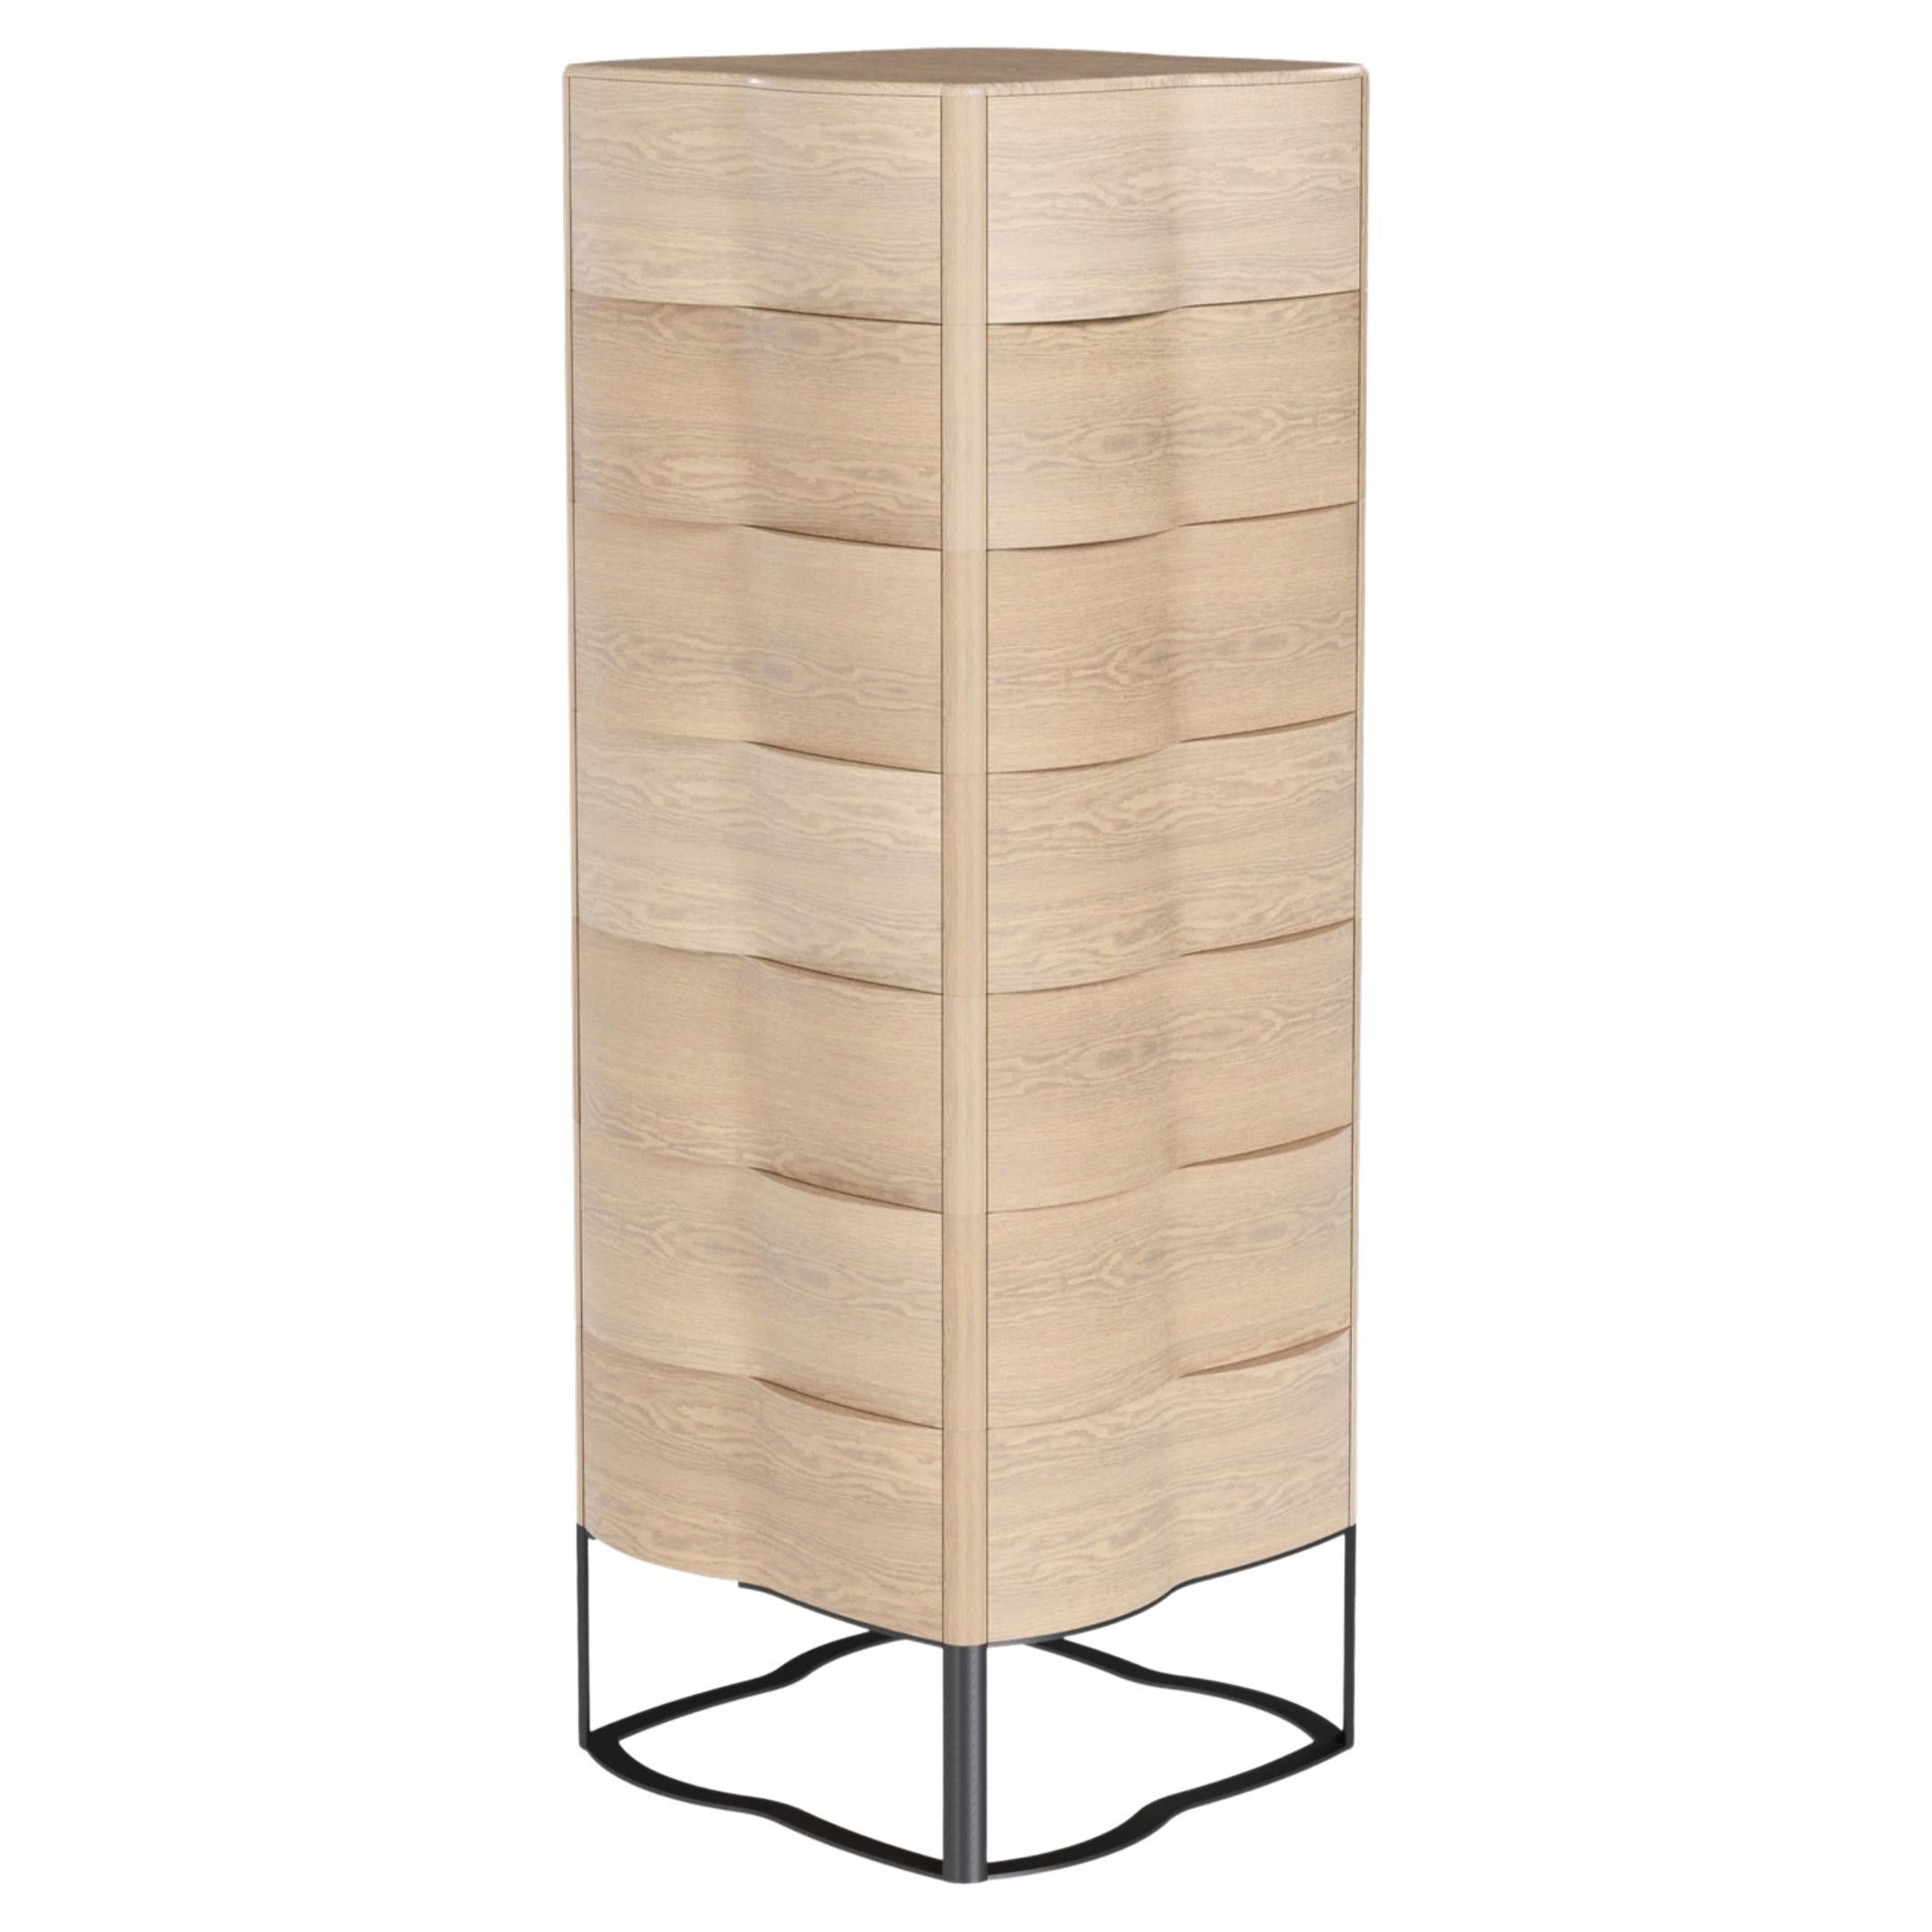 Oak Chest of Drawers Tall Sculptural Design For Sale